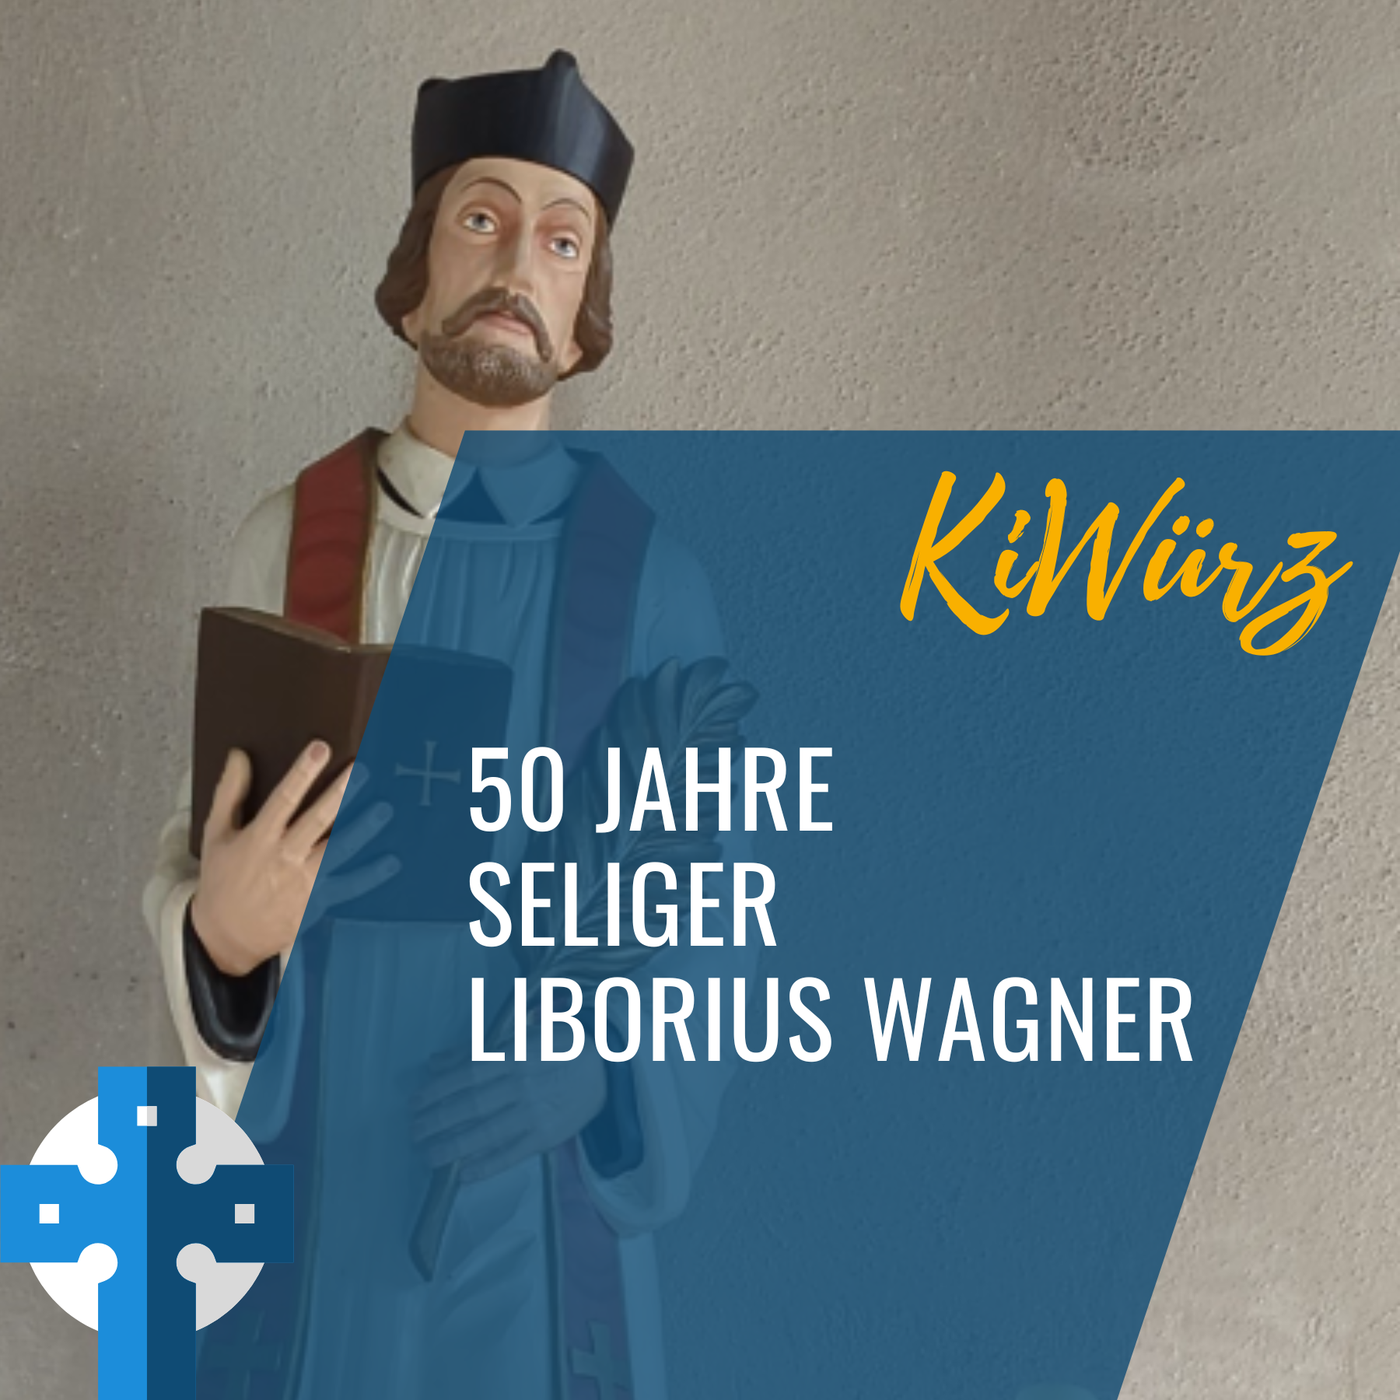 50 Jahre Seligsprechung Liborius Wagner